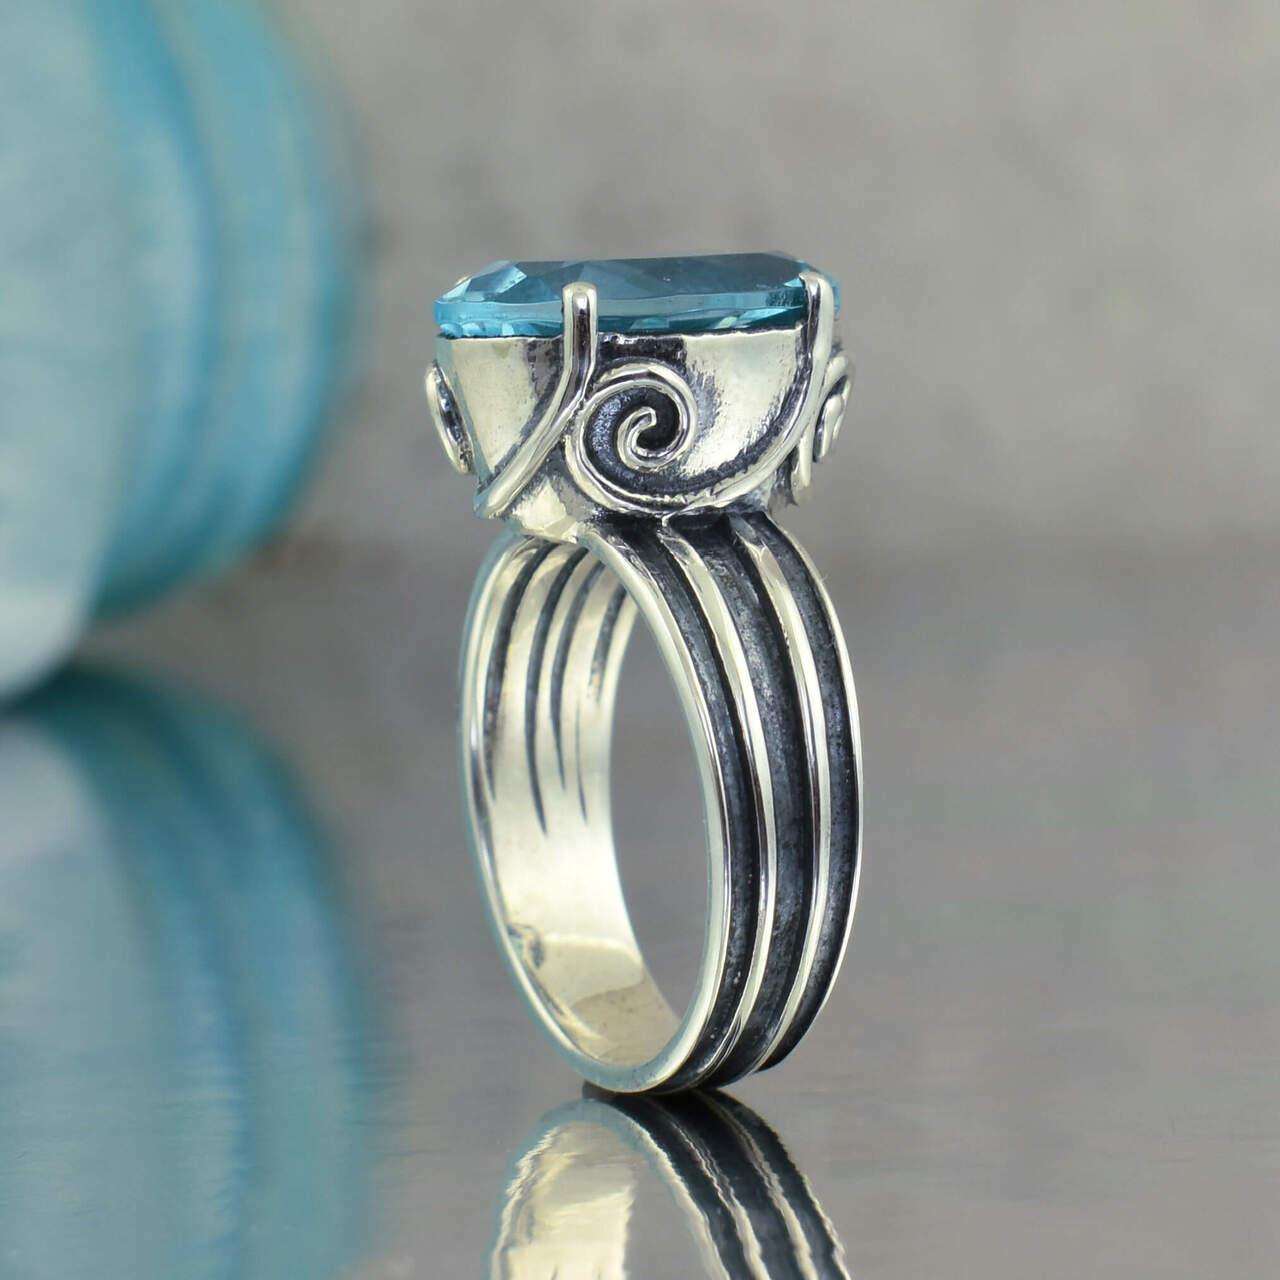 Bahama Breeze Ring in sterling silver